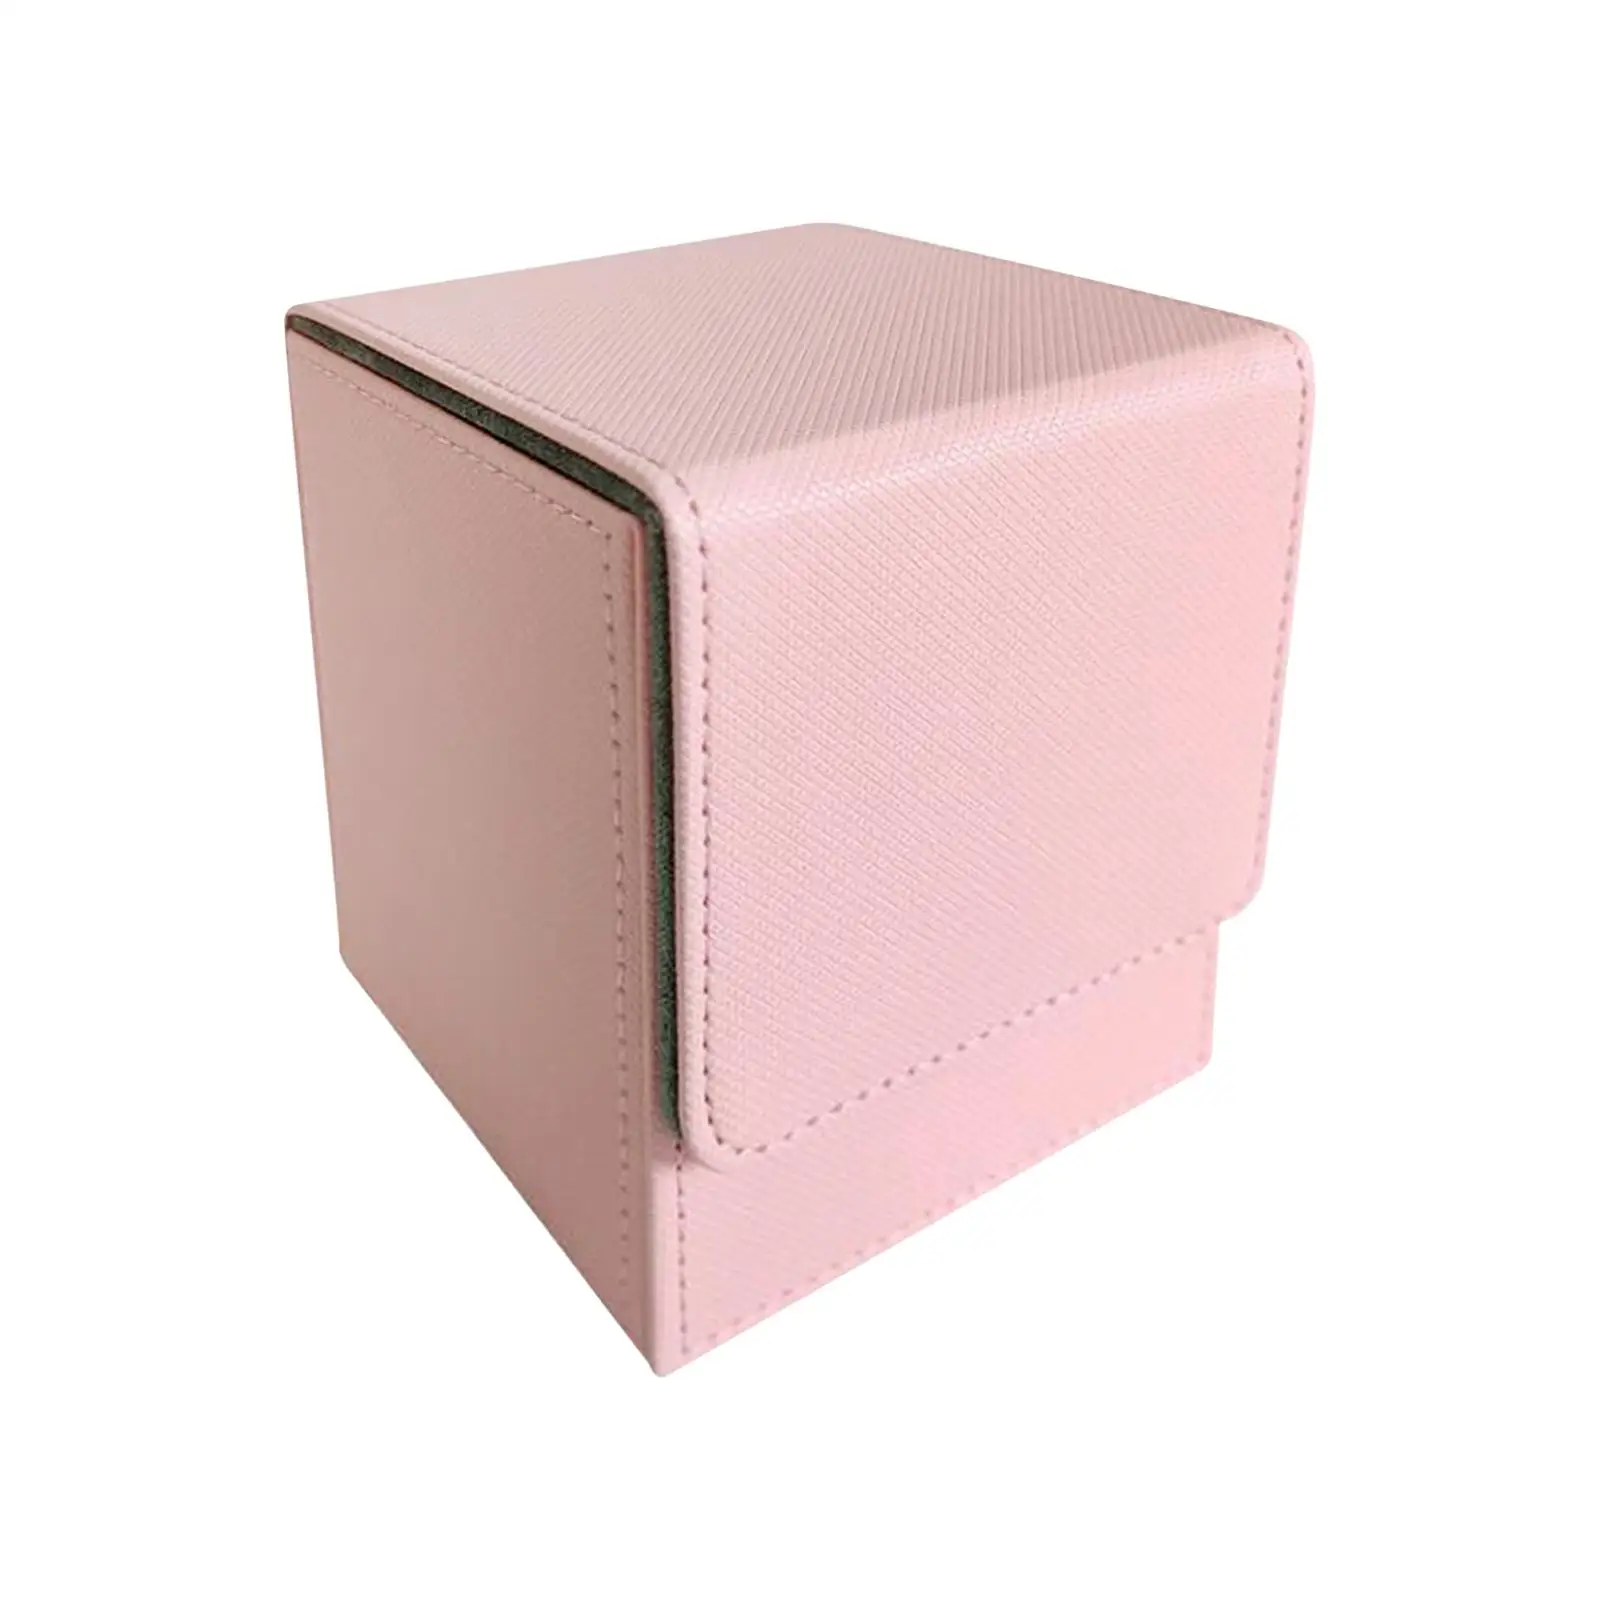 Trading Card Deck Box Collectible Standard with Card Divider Durable Sturdy Strong Sleeved Cards Holder 3.11`` x 3.11`` x 4.29``